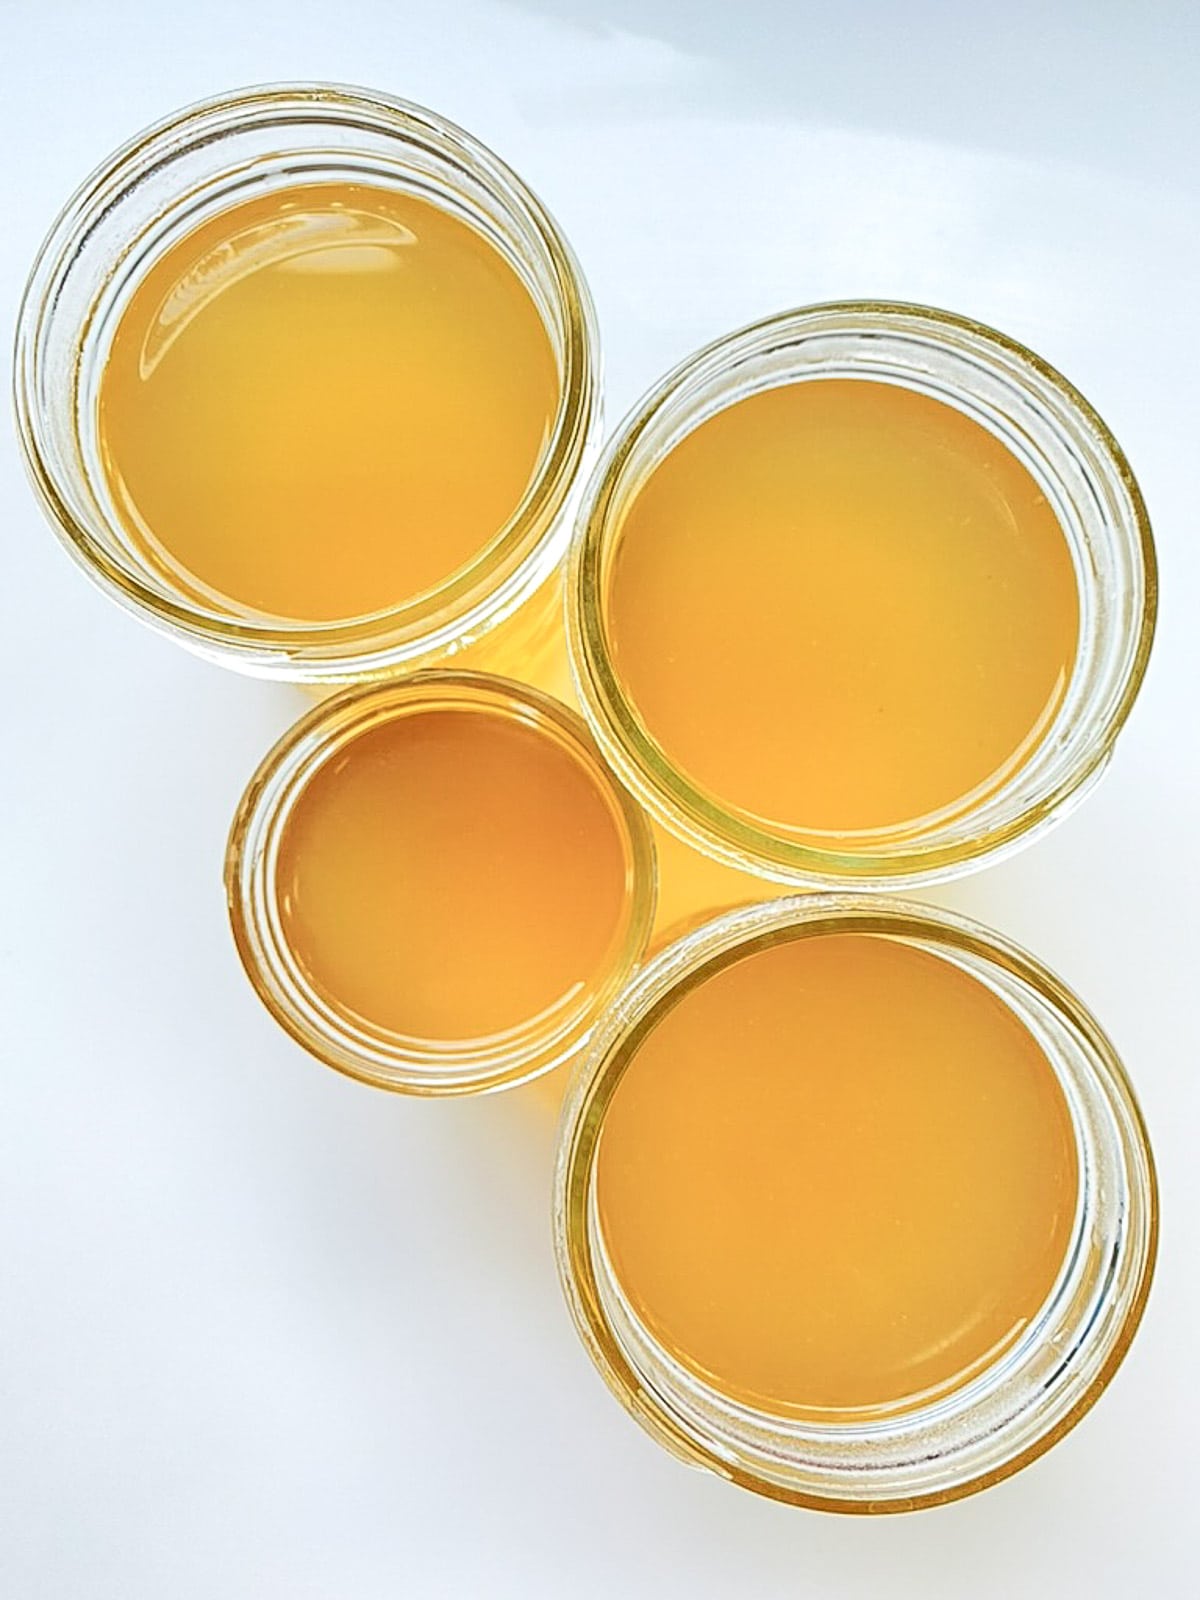 An image of mason jars filled with corn broth.